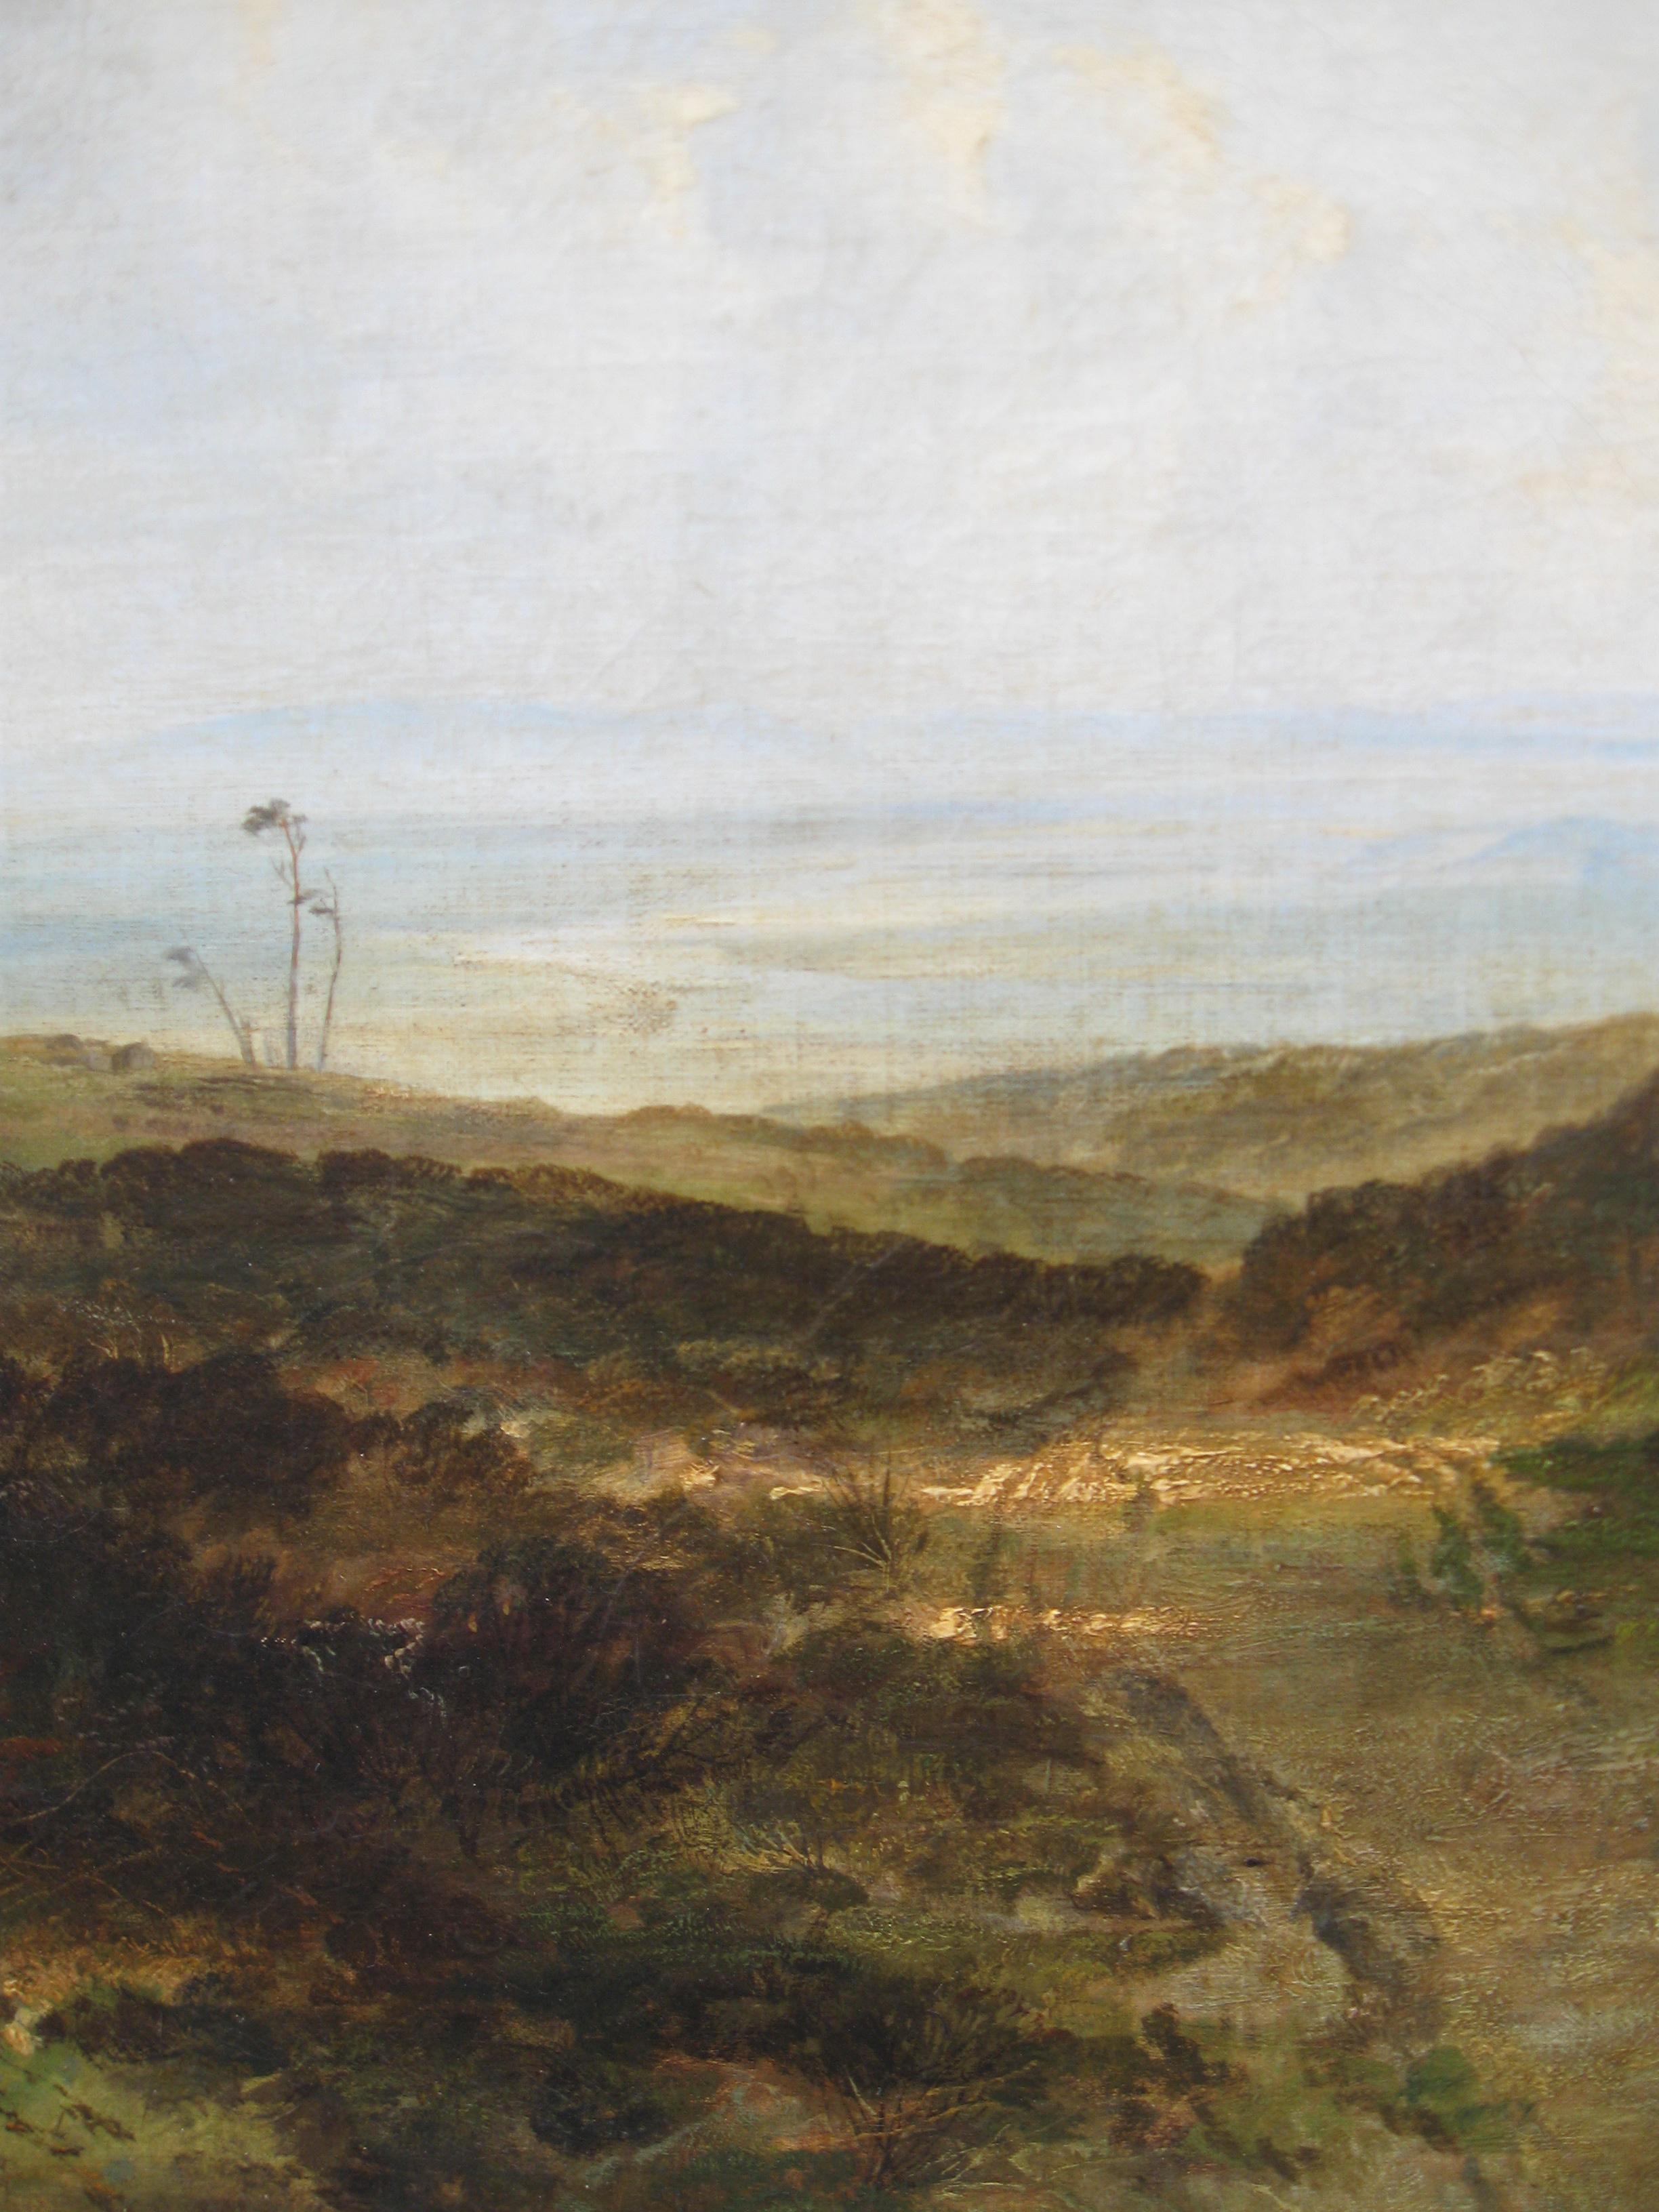 Extensive Moorland Landscape large 19th Century Oil - Gray Landscape Painting by Thomas Creswick